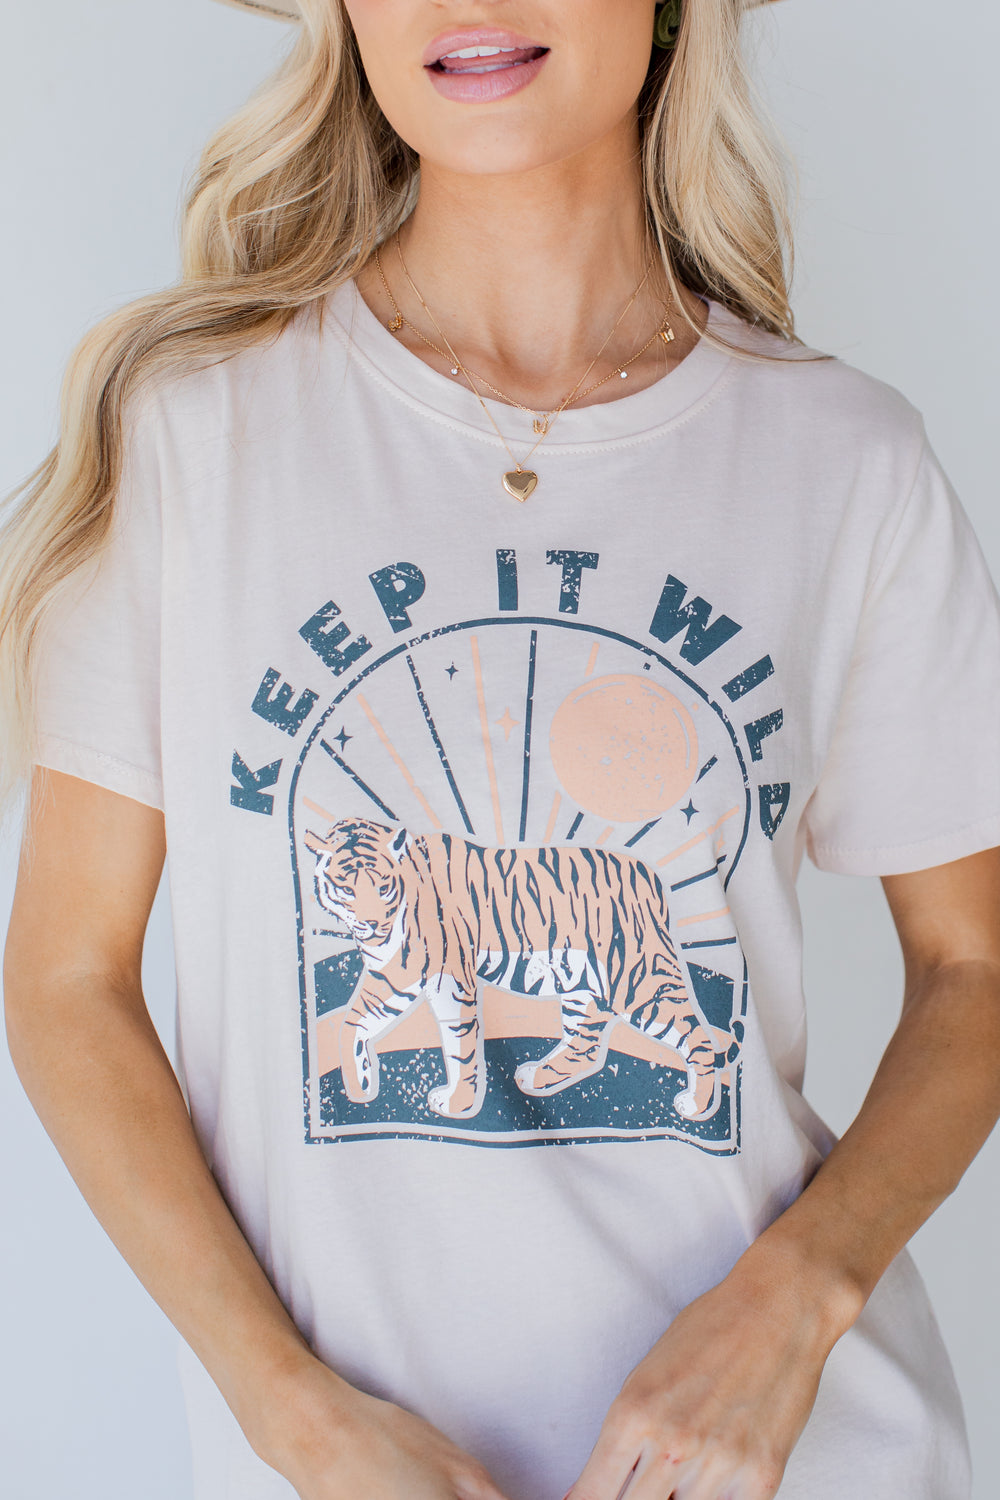 Keep It Wild Graphic Tee from dress up